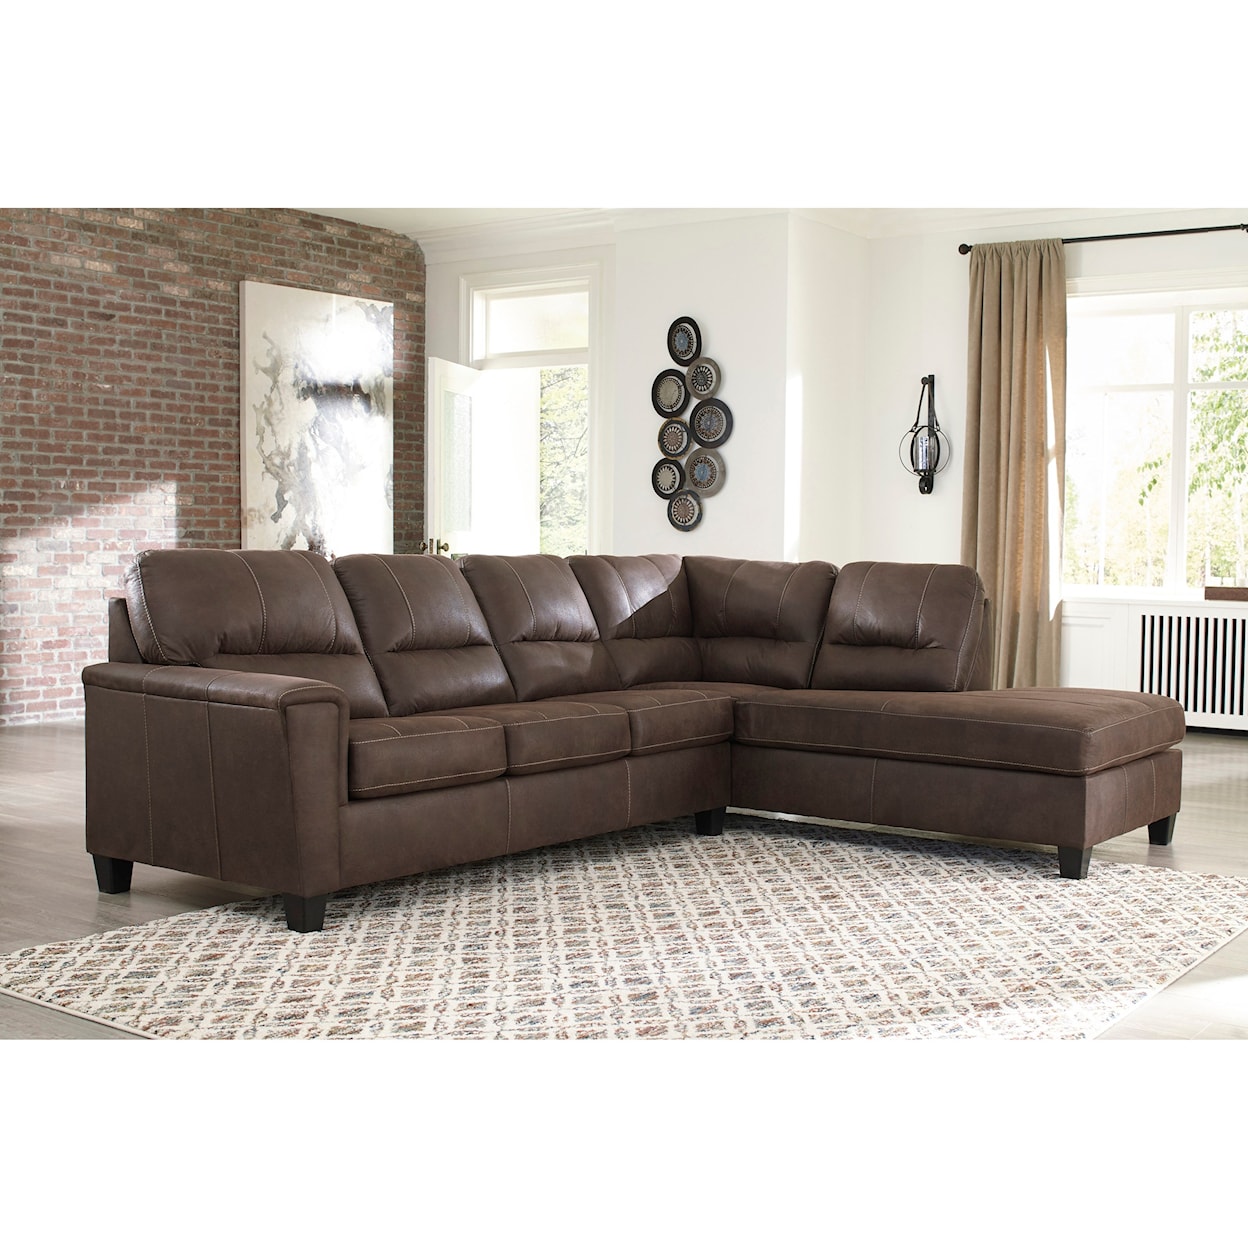 Michael Alan Select Navi 2-Piece Sectional with Right Chaise